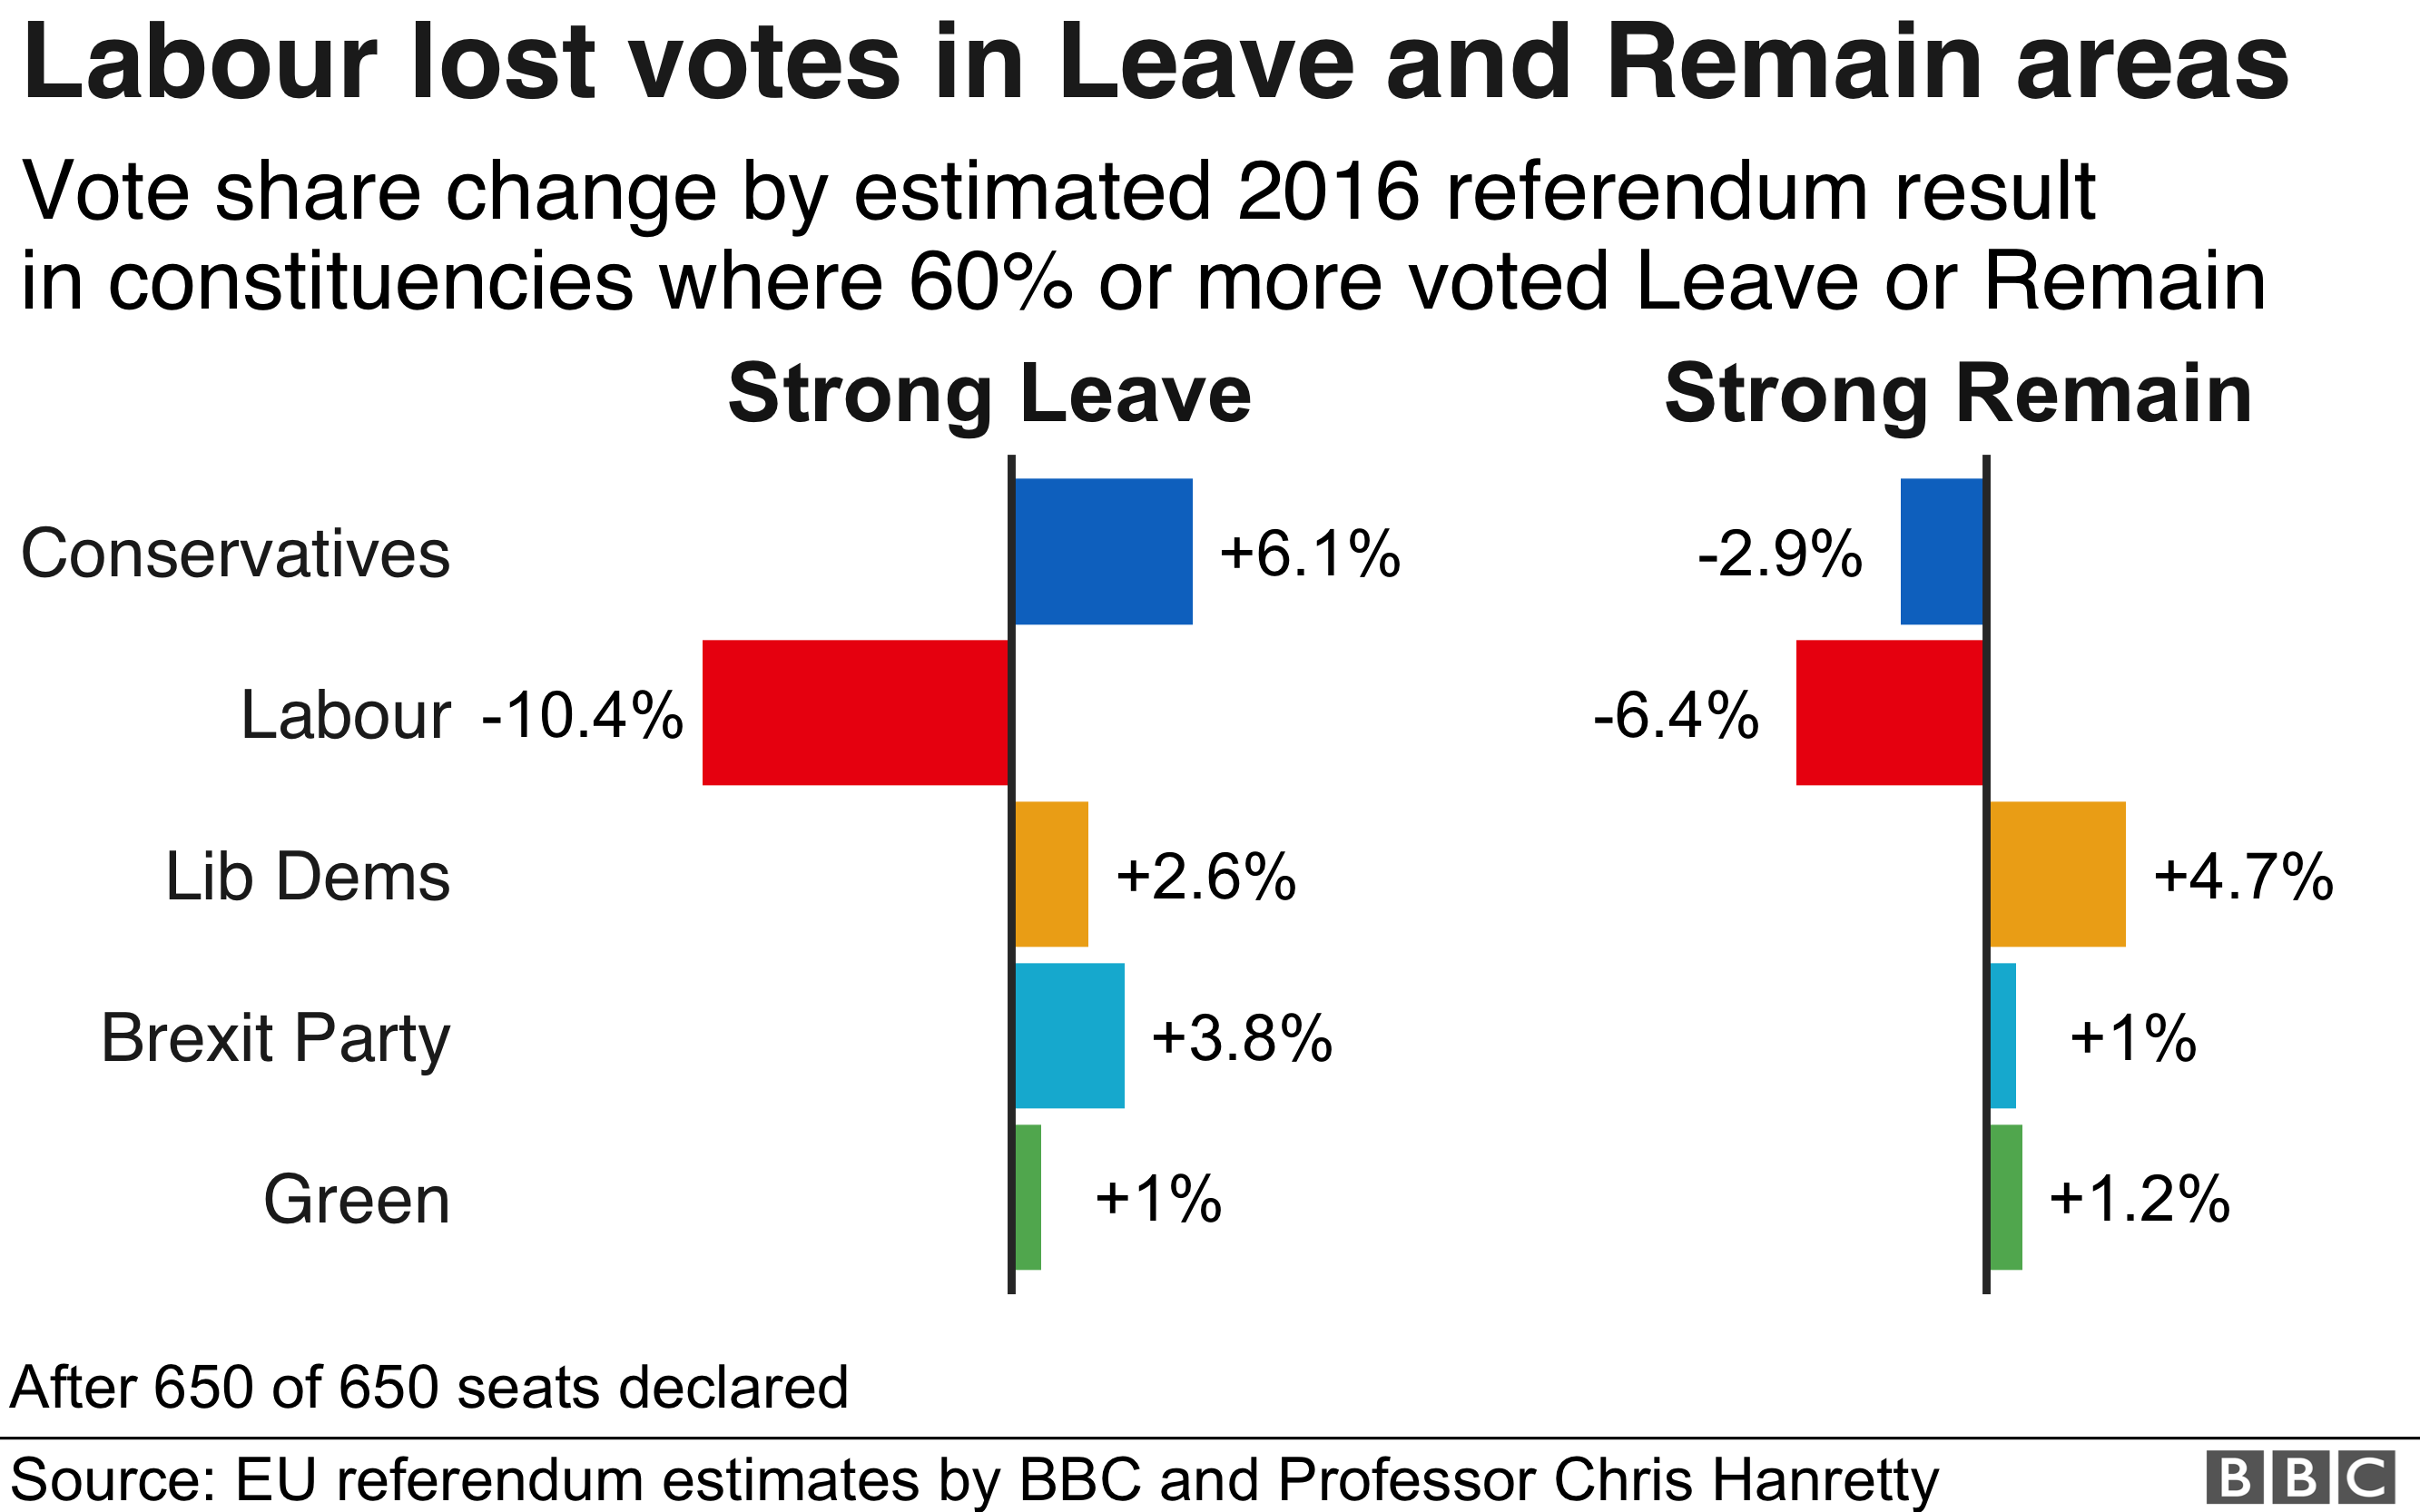 vote share changes in leave and remain areas